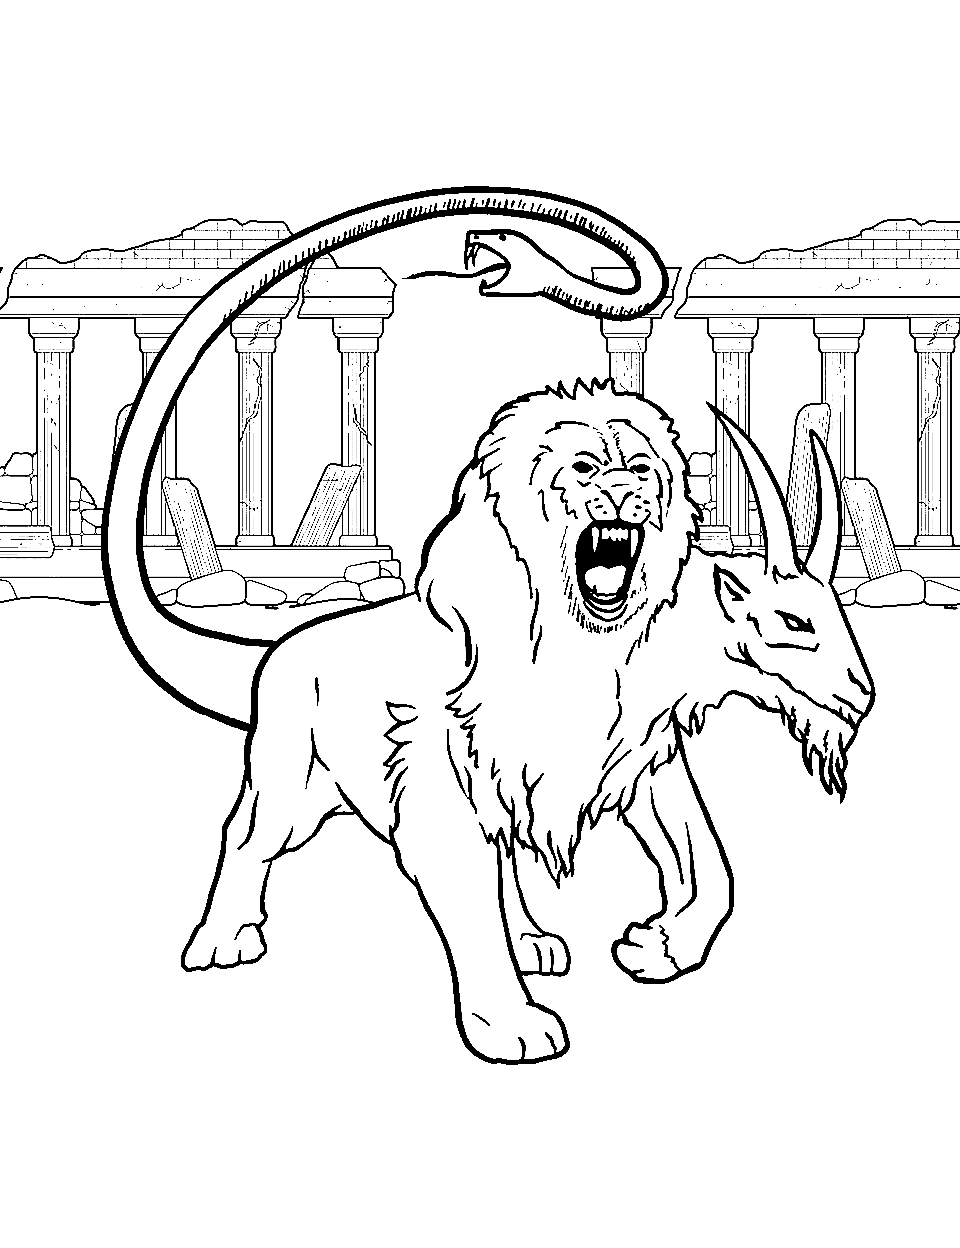 Greek Chimera Monster Coloring Page - A mythical Chimera standing in front of ancient Greek ruins.